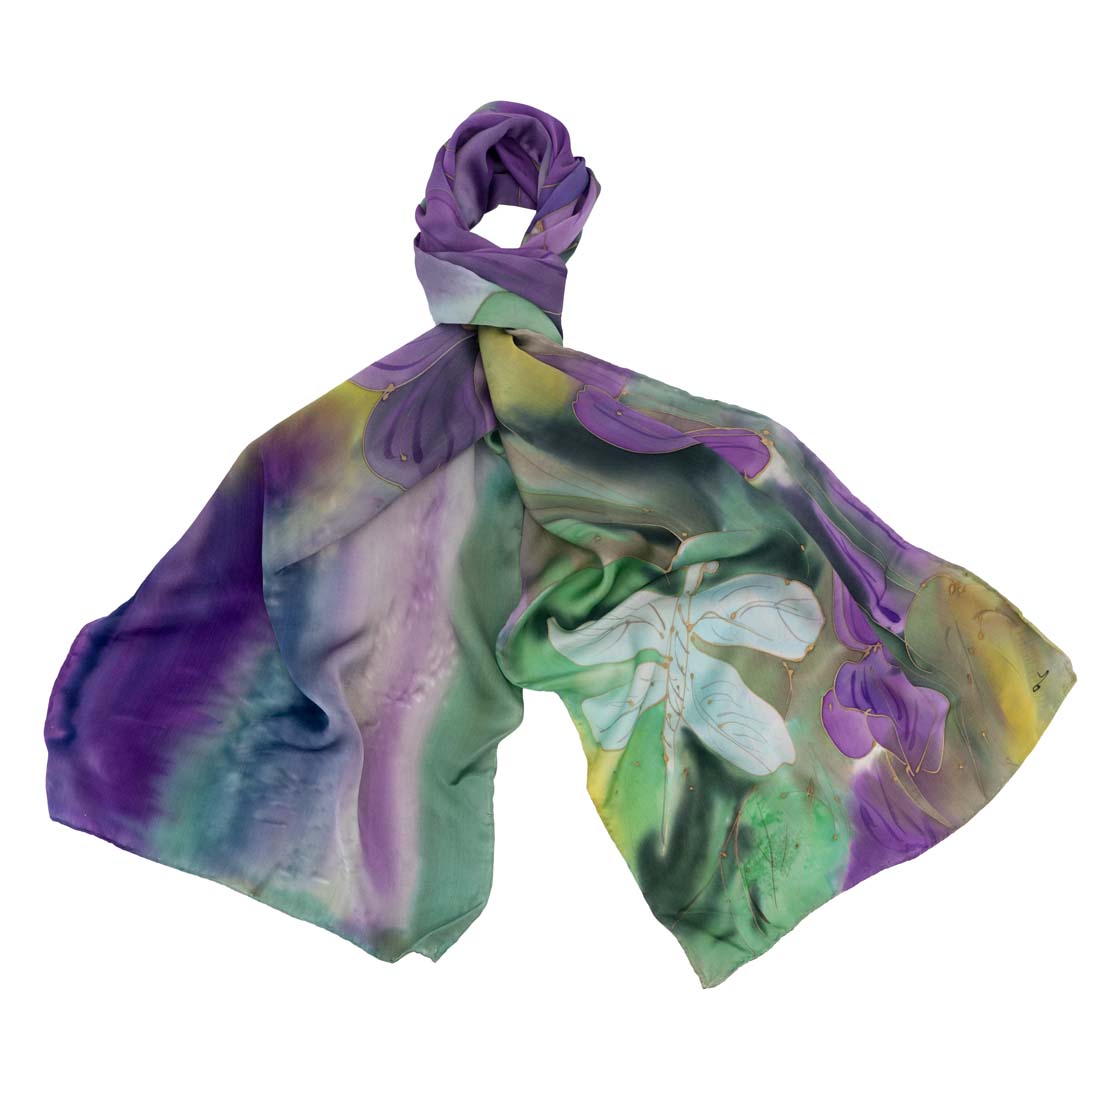 Dragonfly and Purple Flowers Hand-Painted Silk Scarf